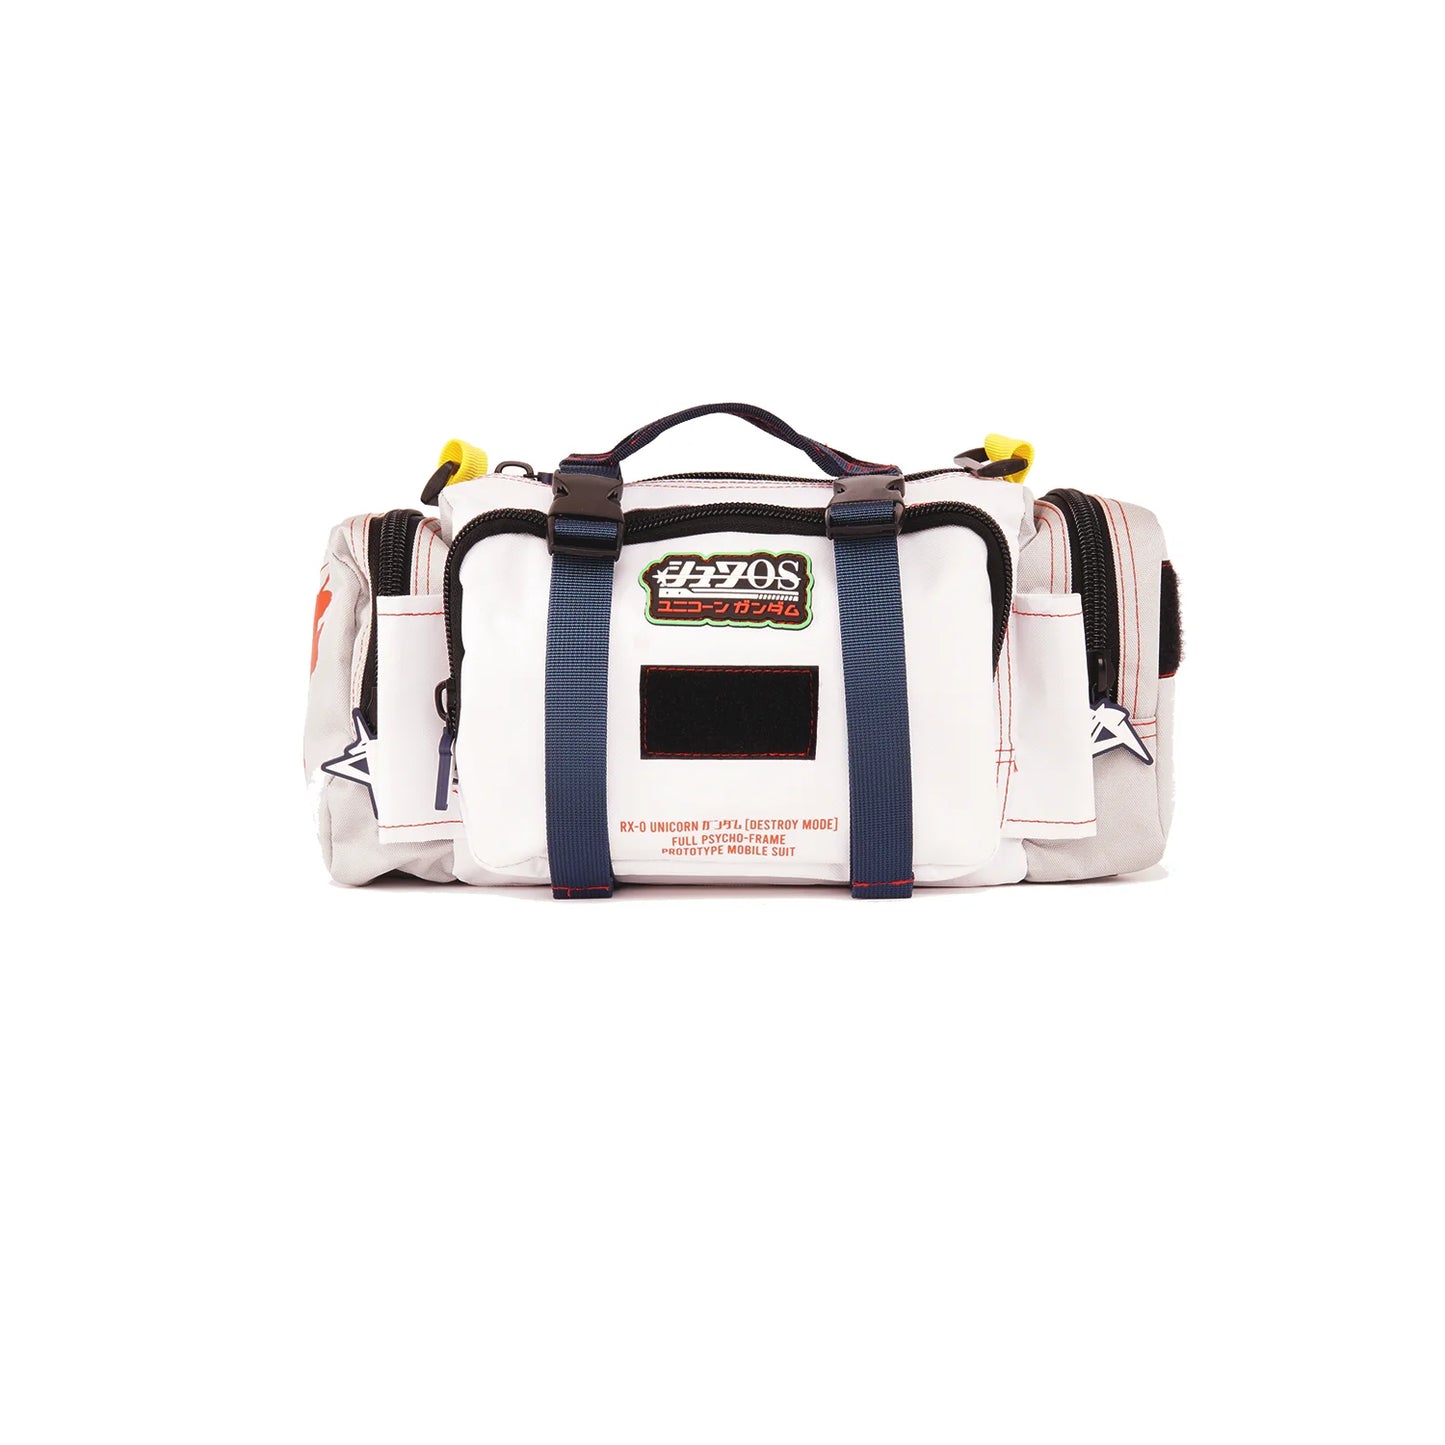 SHWA - Unicorn Mini Duffle with Strap (Pre-Order) Patches Included